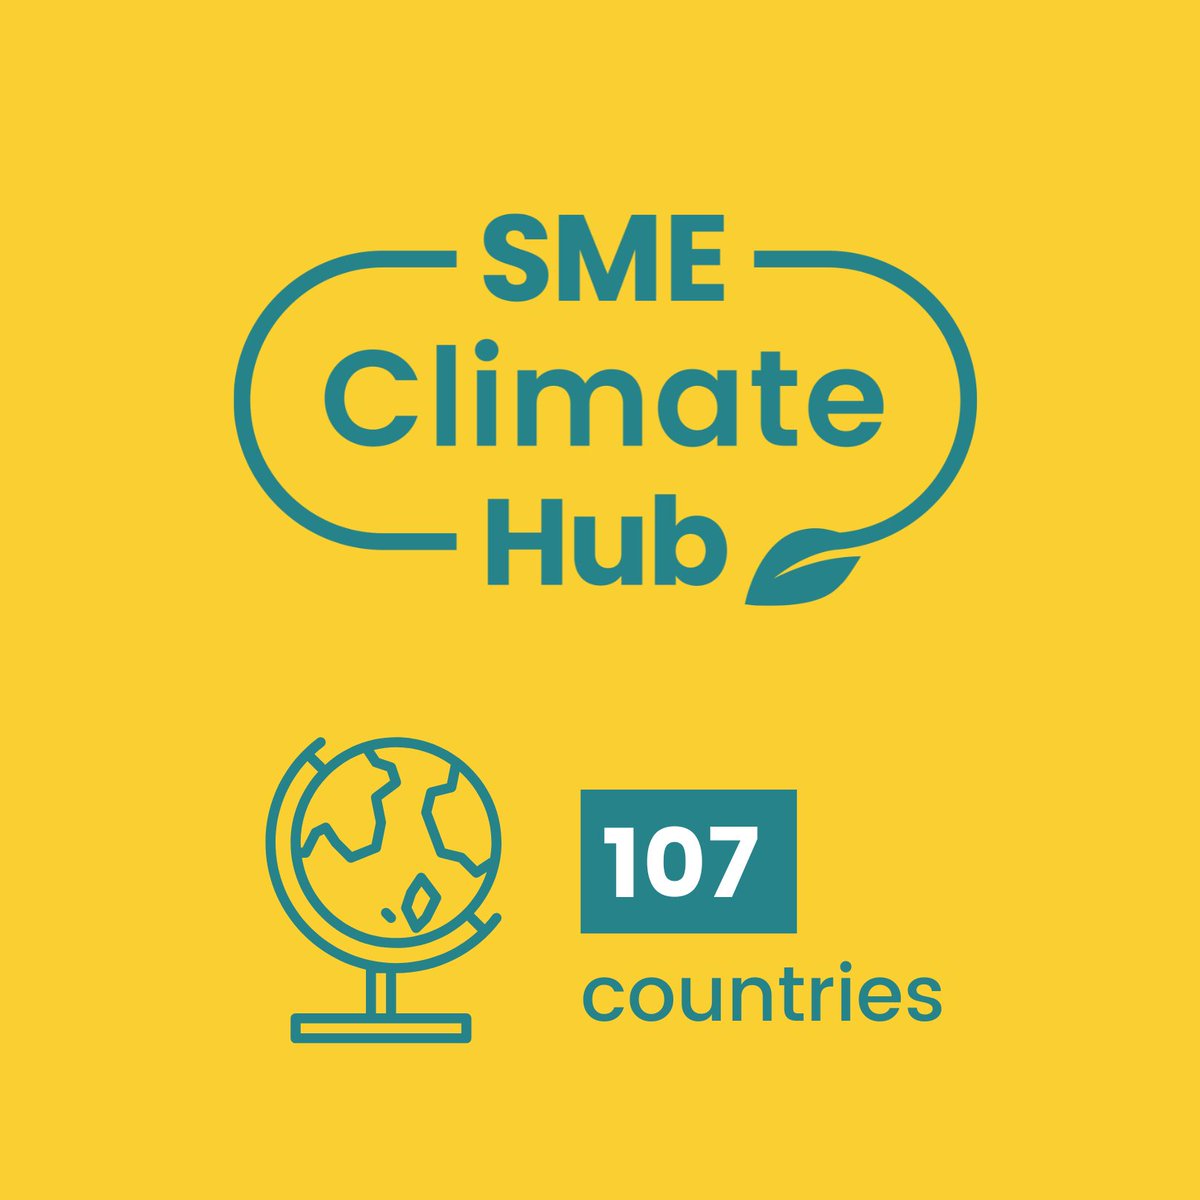 🌍 Small to medium-sized enterprises across 107 countries have committed to net zero through the SME Climate Hub and are taking immediate #climateaction. Every business, no matter their size or industry, can play a part in delivering a greener future. 🔎 smeclimatehub.org/how-it-works